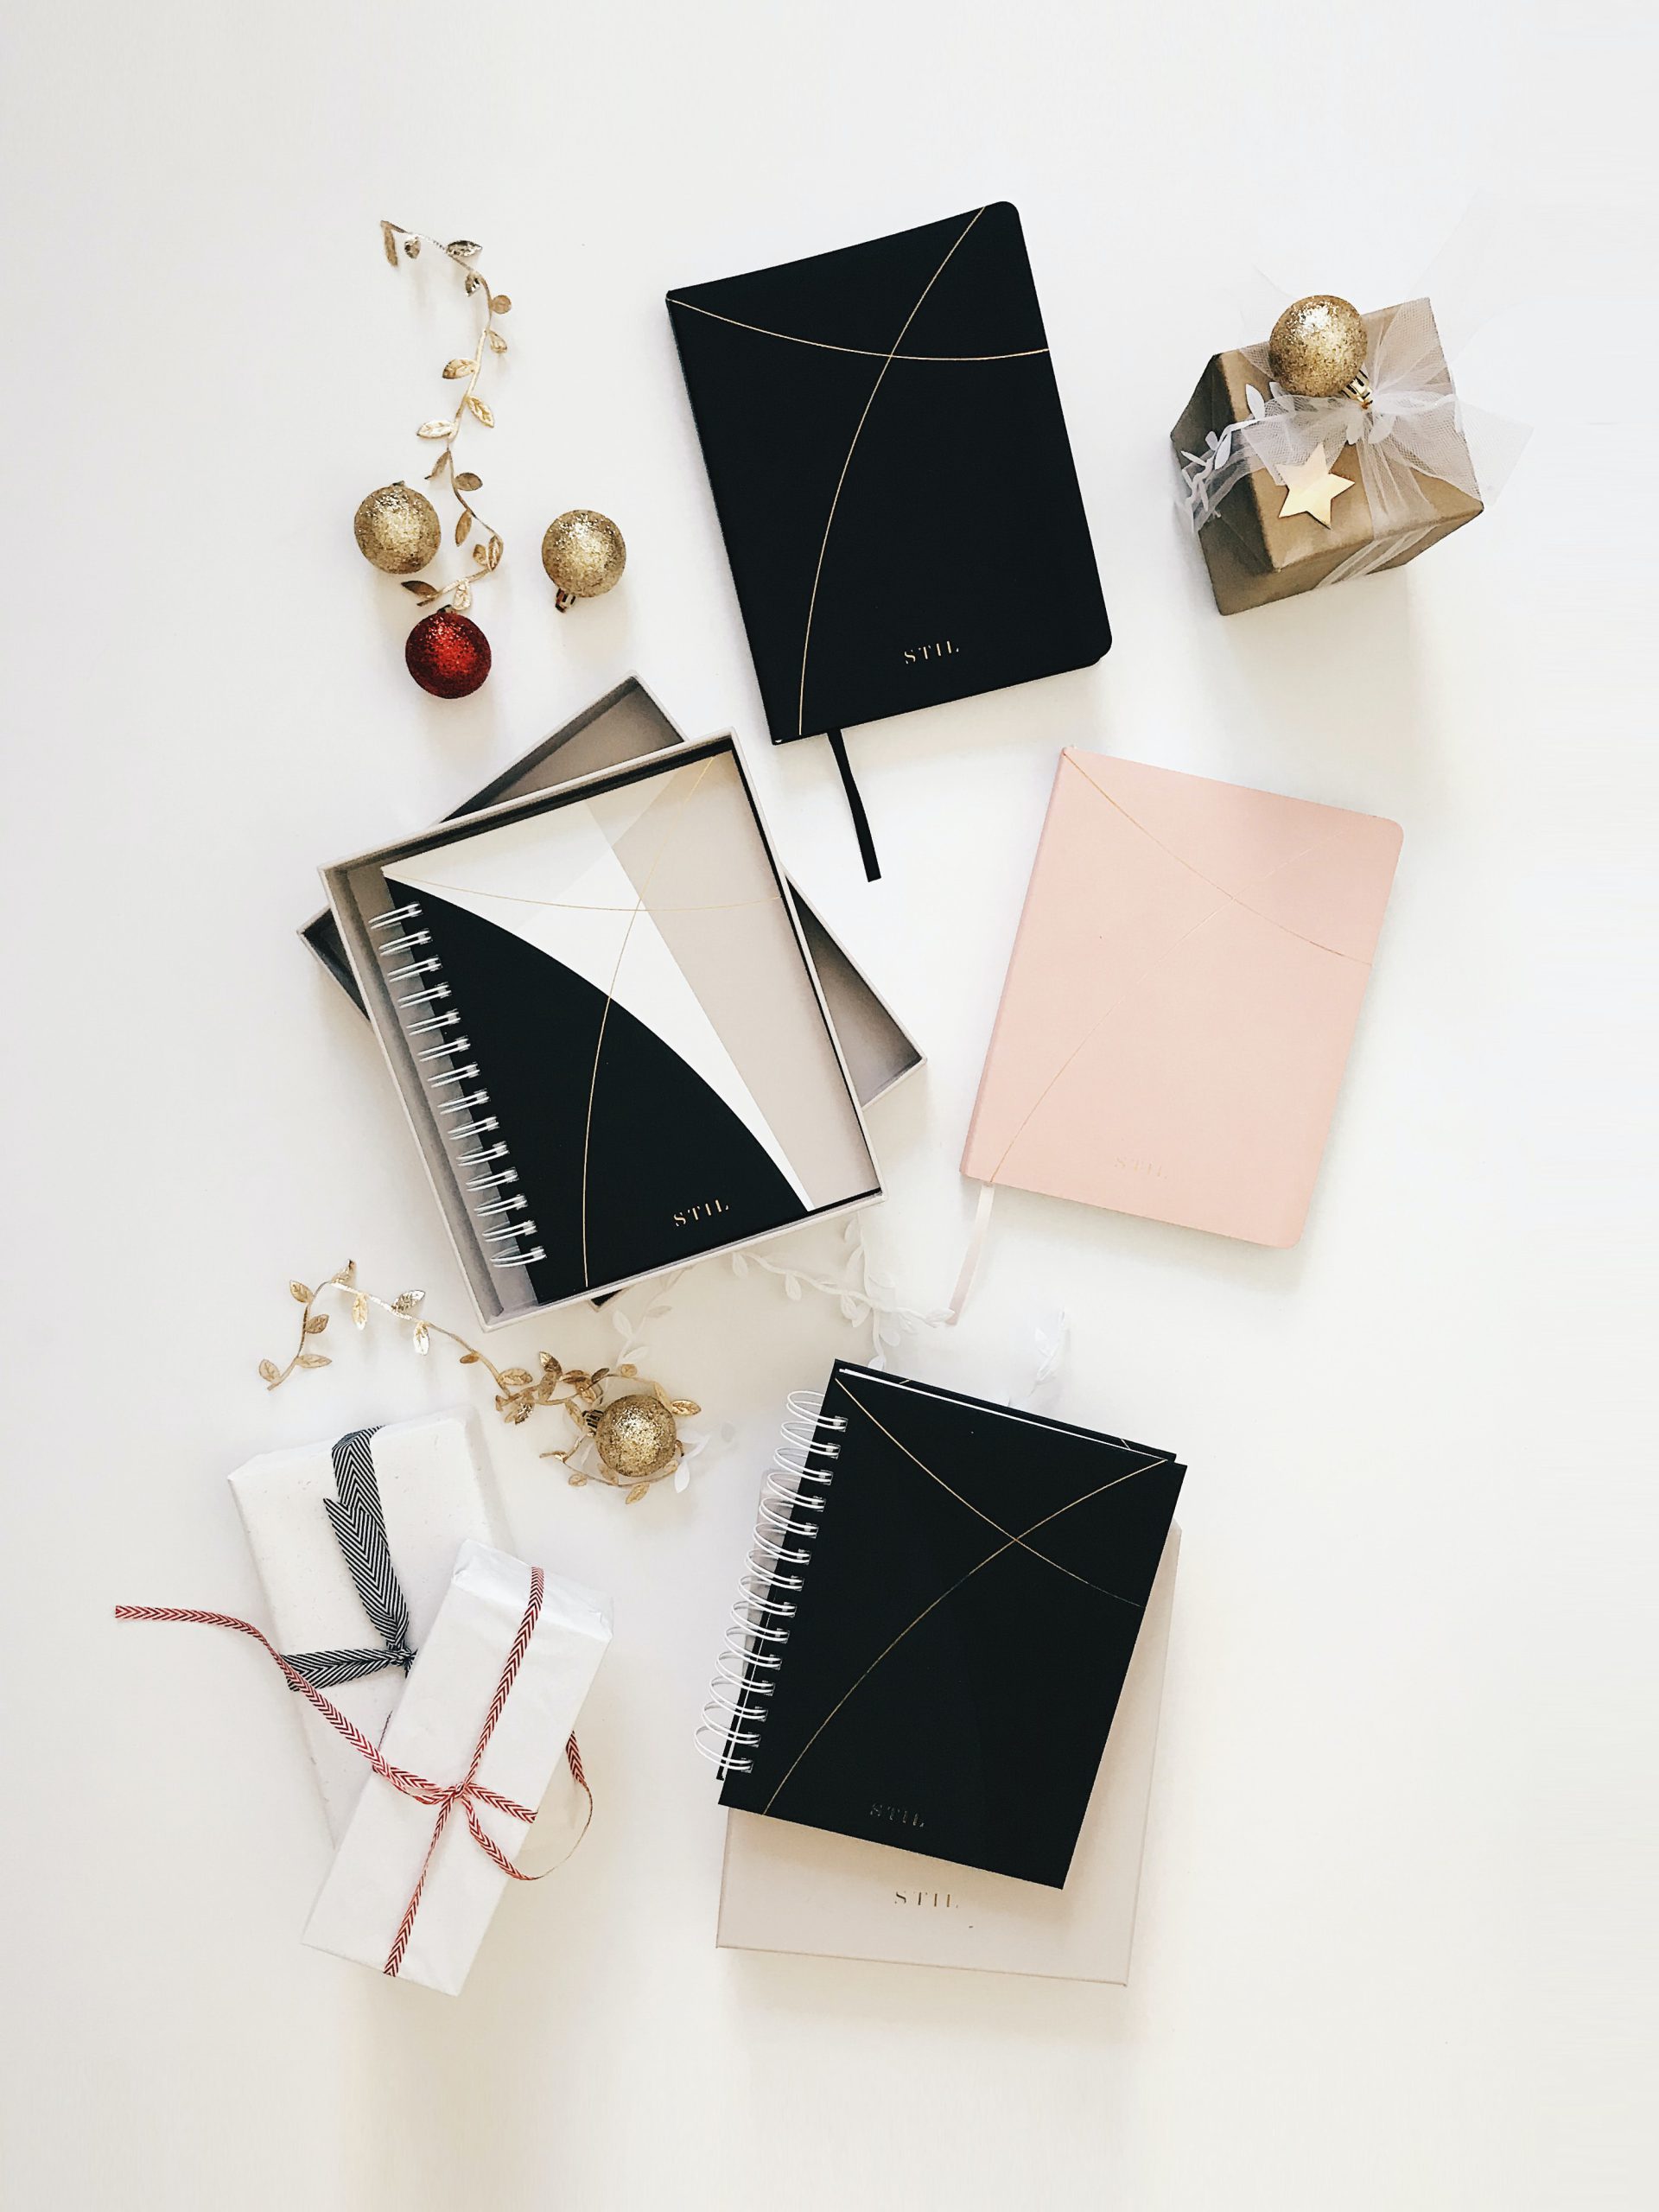 presents and notebooks displayed on a white table